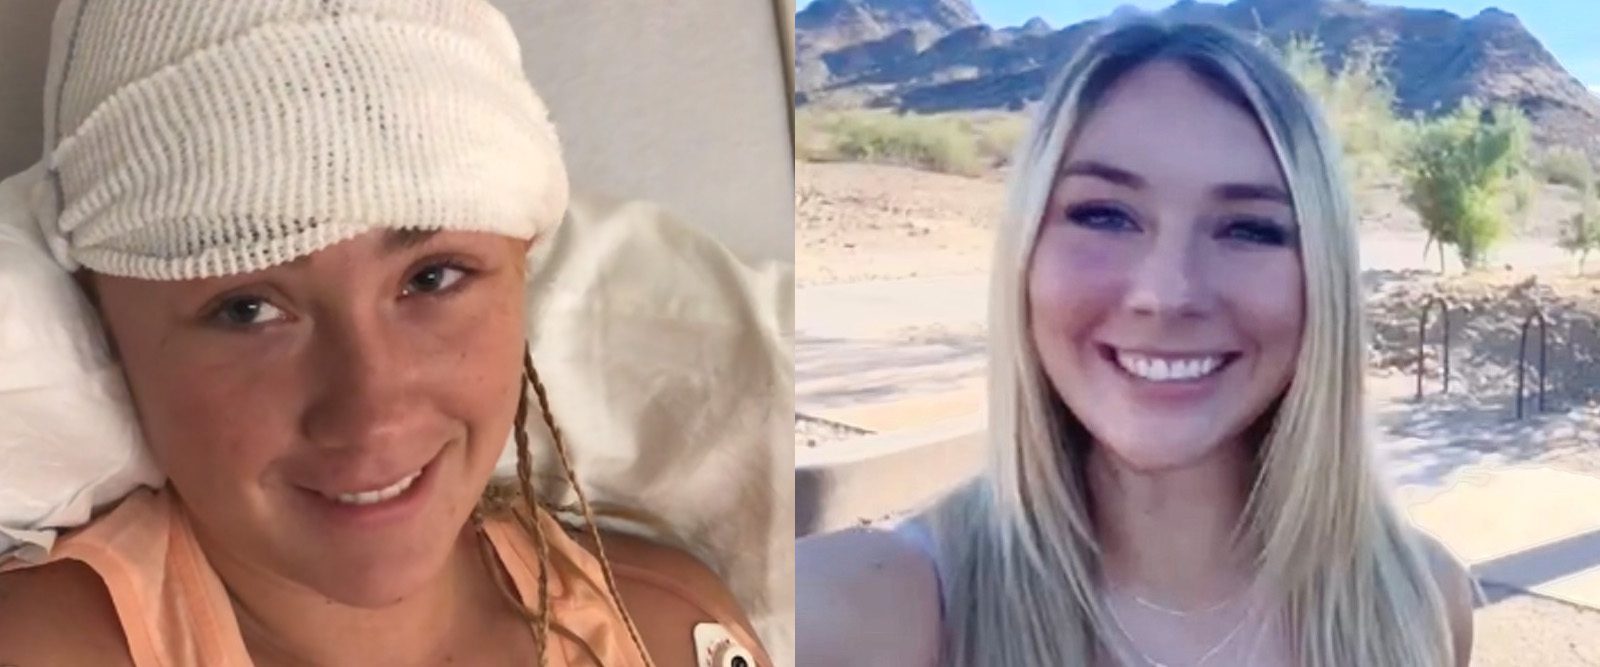 Gianna Spirio in the hospital after surgery and on a hike living life.